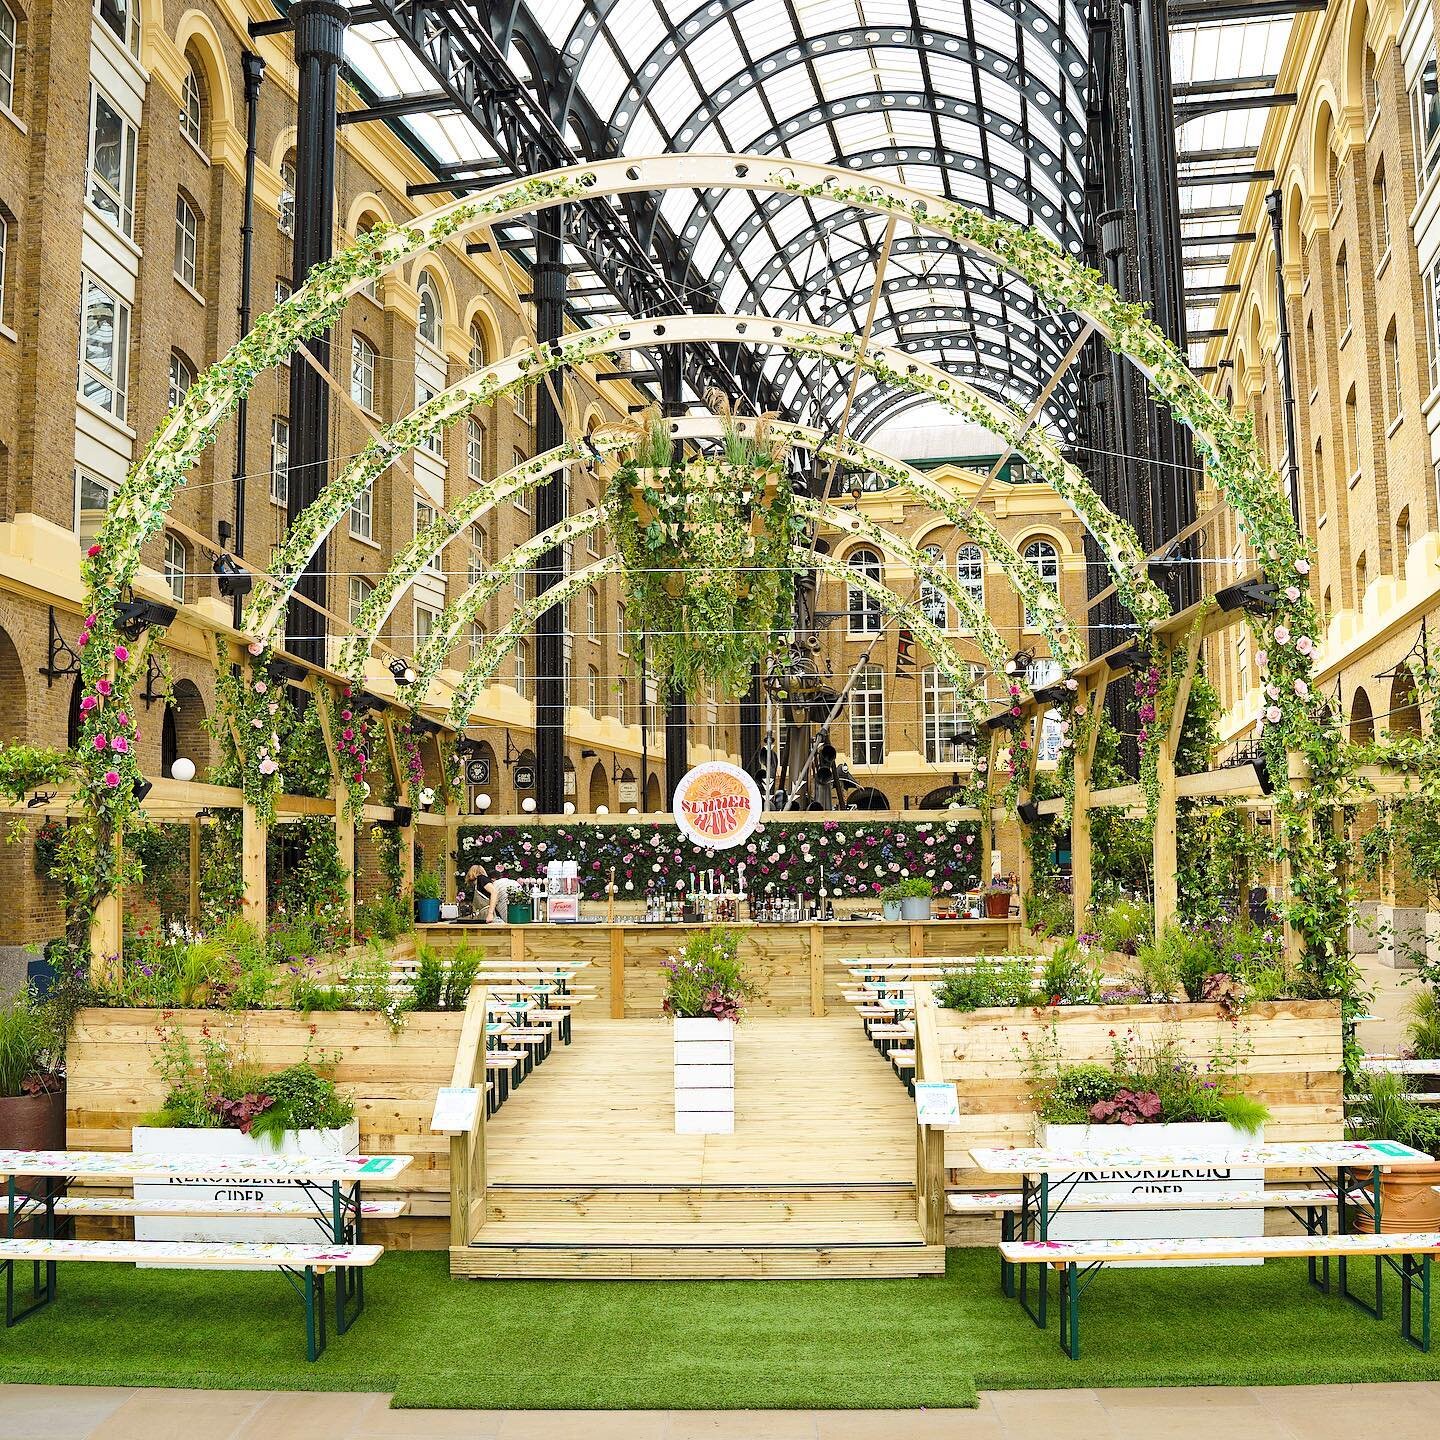 Introducing Summer Hays, our new Southbank pop-up in Hays Galleria 🥳

Housed under a glorious glass galleria, we&rsquo;ve got you covered for all the weather the British summer has to throw at us, with our fantastic line up of drinks, street food, c